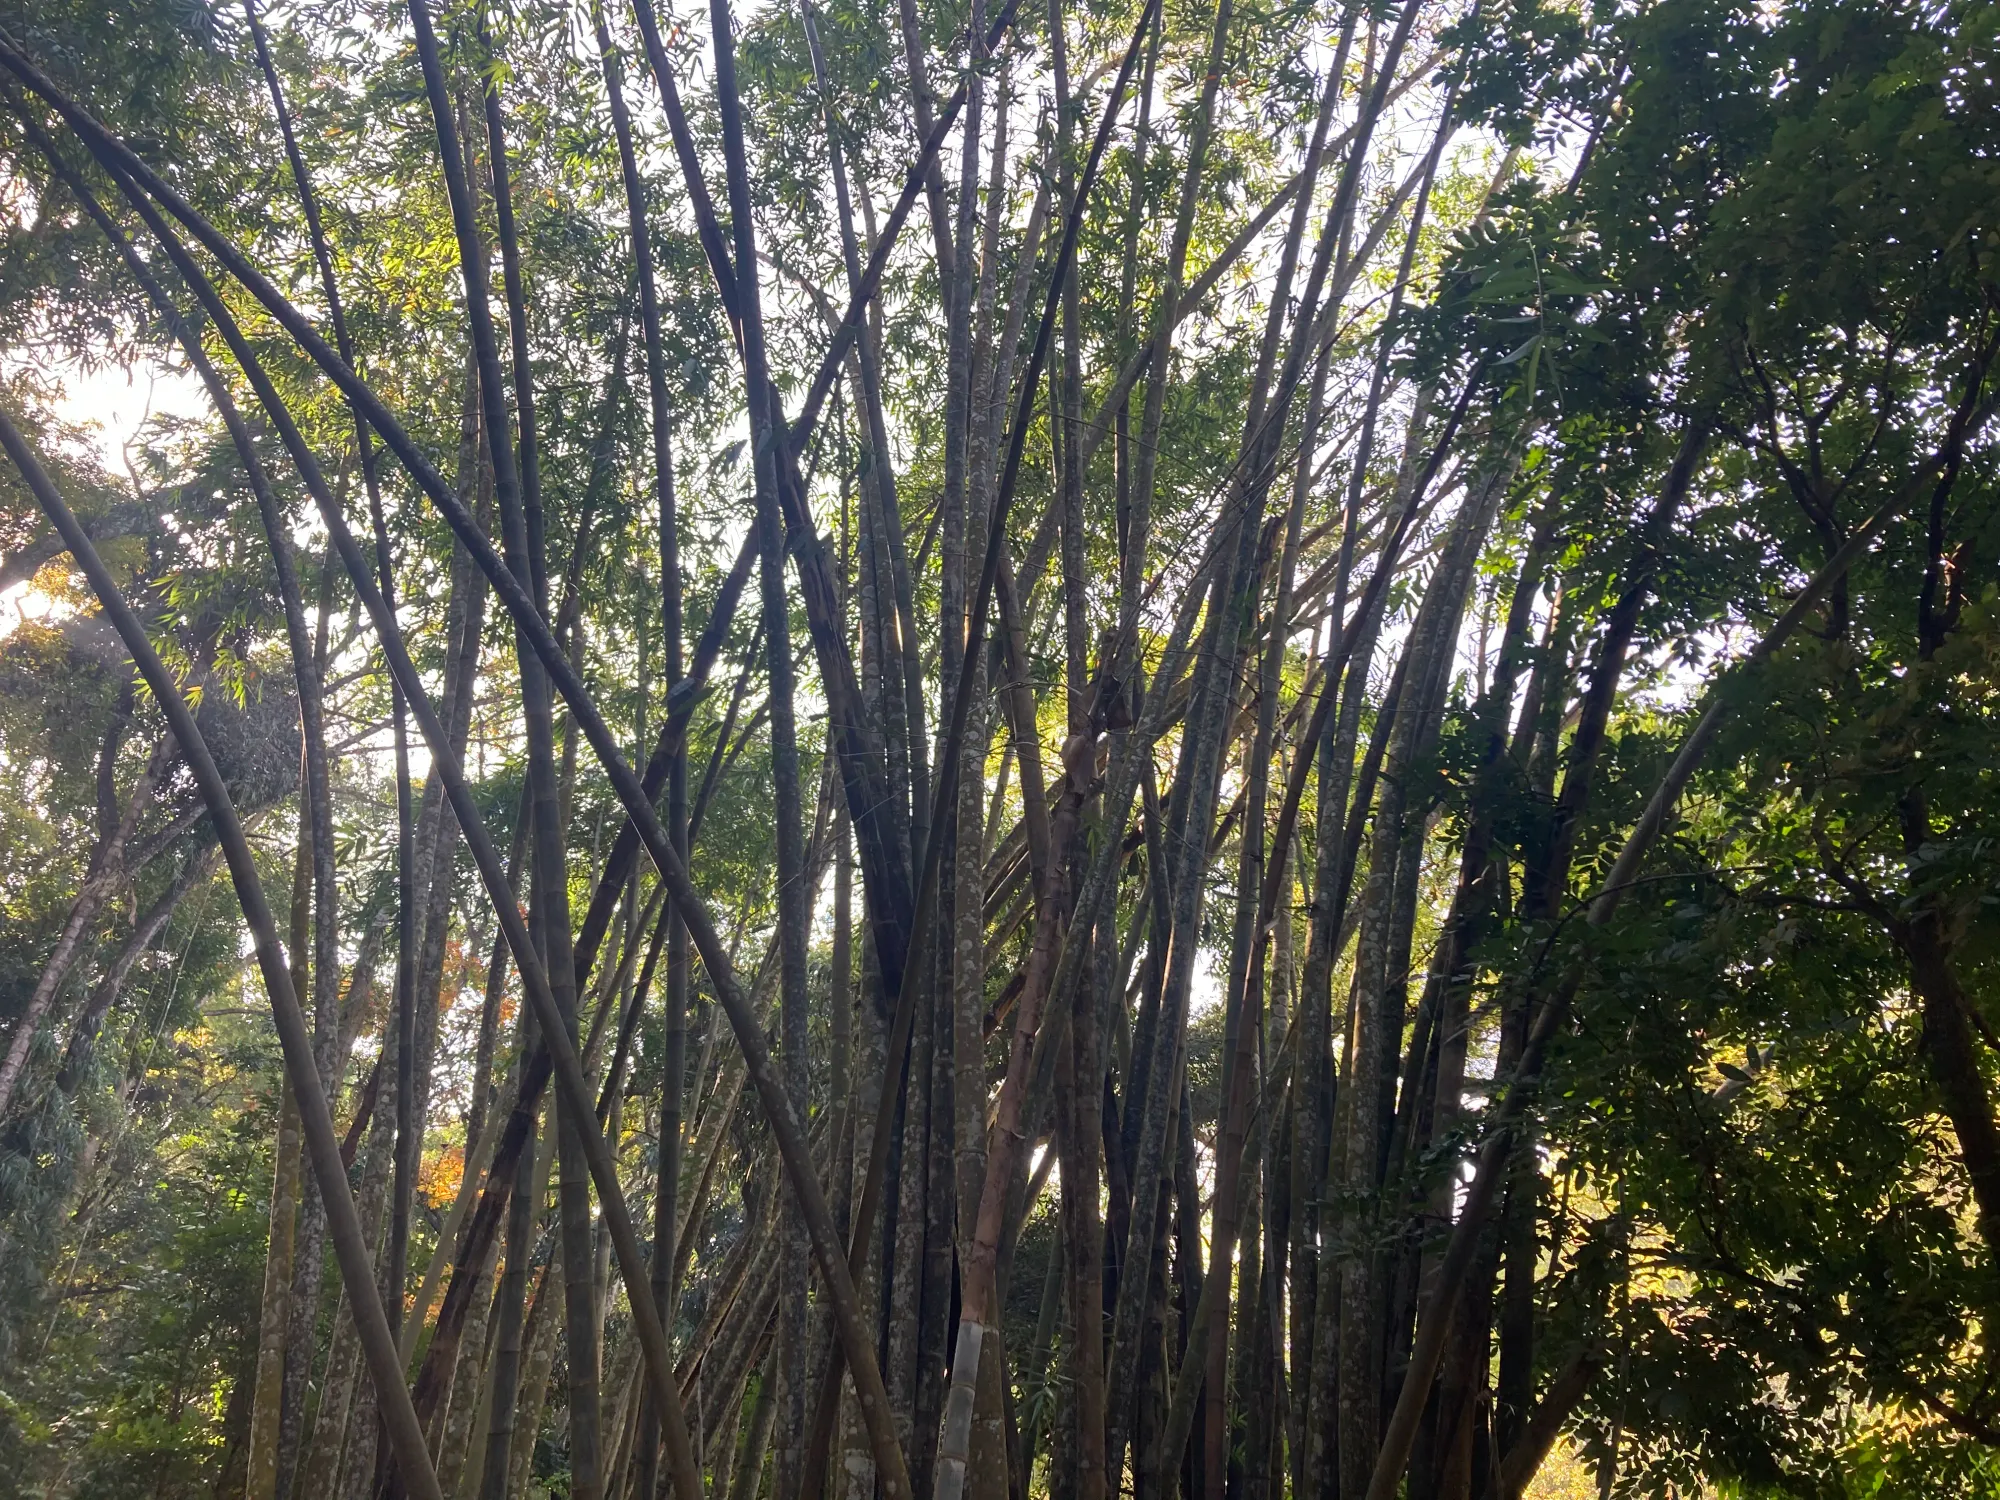 The Giant Bamboo at the Udawattakele Sanctuary in Kandy, Sri Lanka.